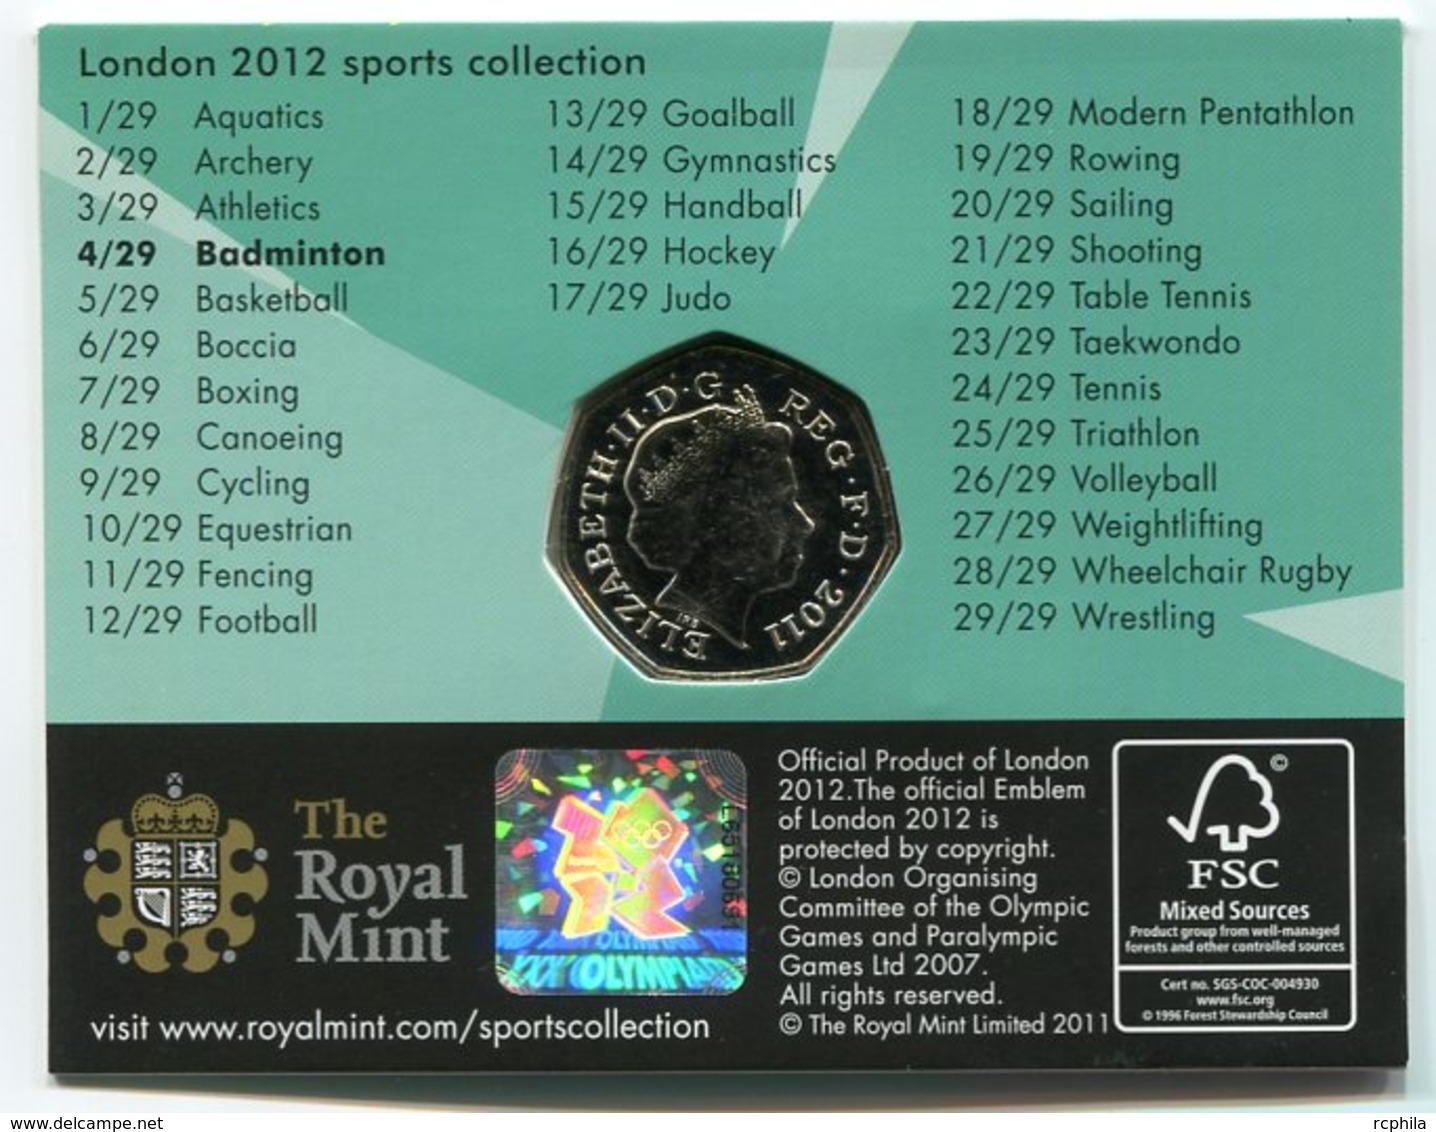 RC 8619 GB 50 PENCE LONDON 2012 SPORTS COLLECTIONS BADMINTON - 50 Pence